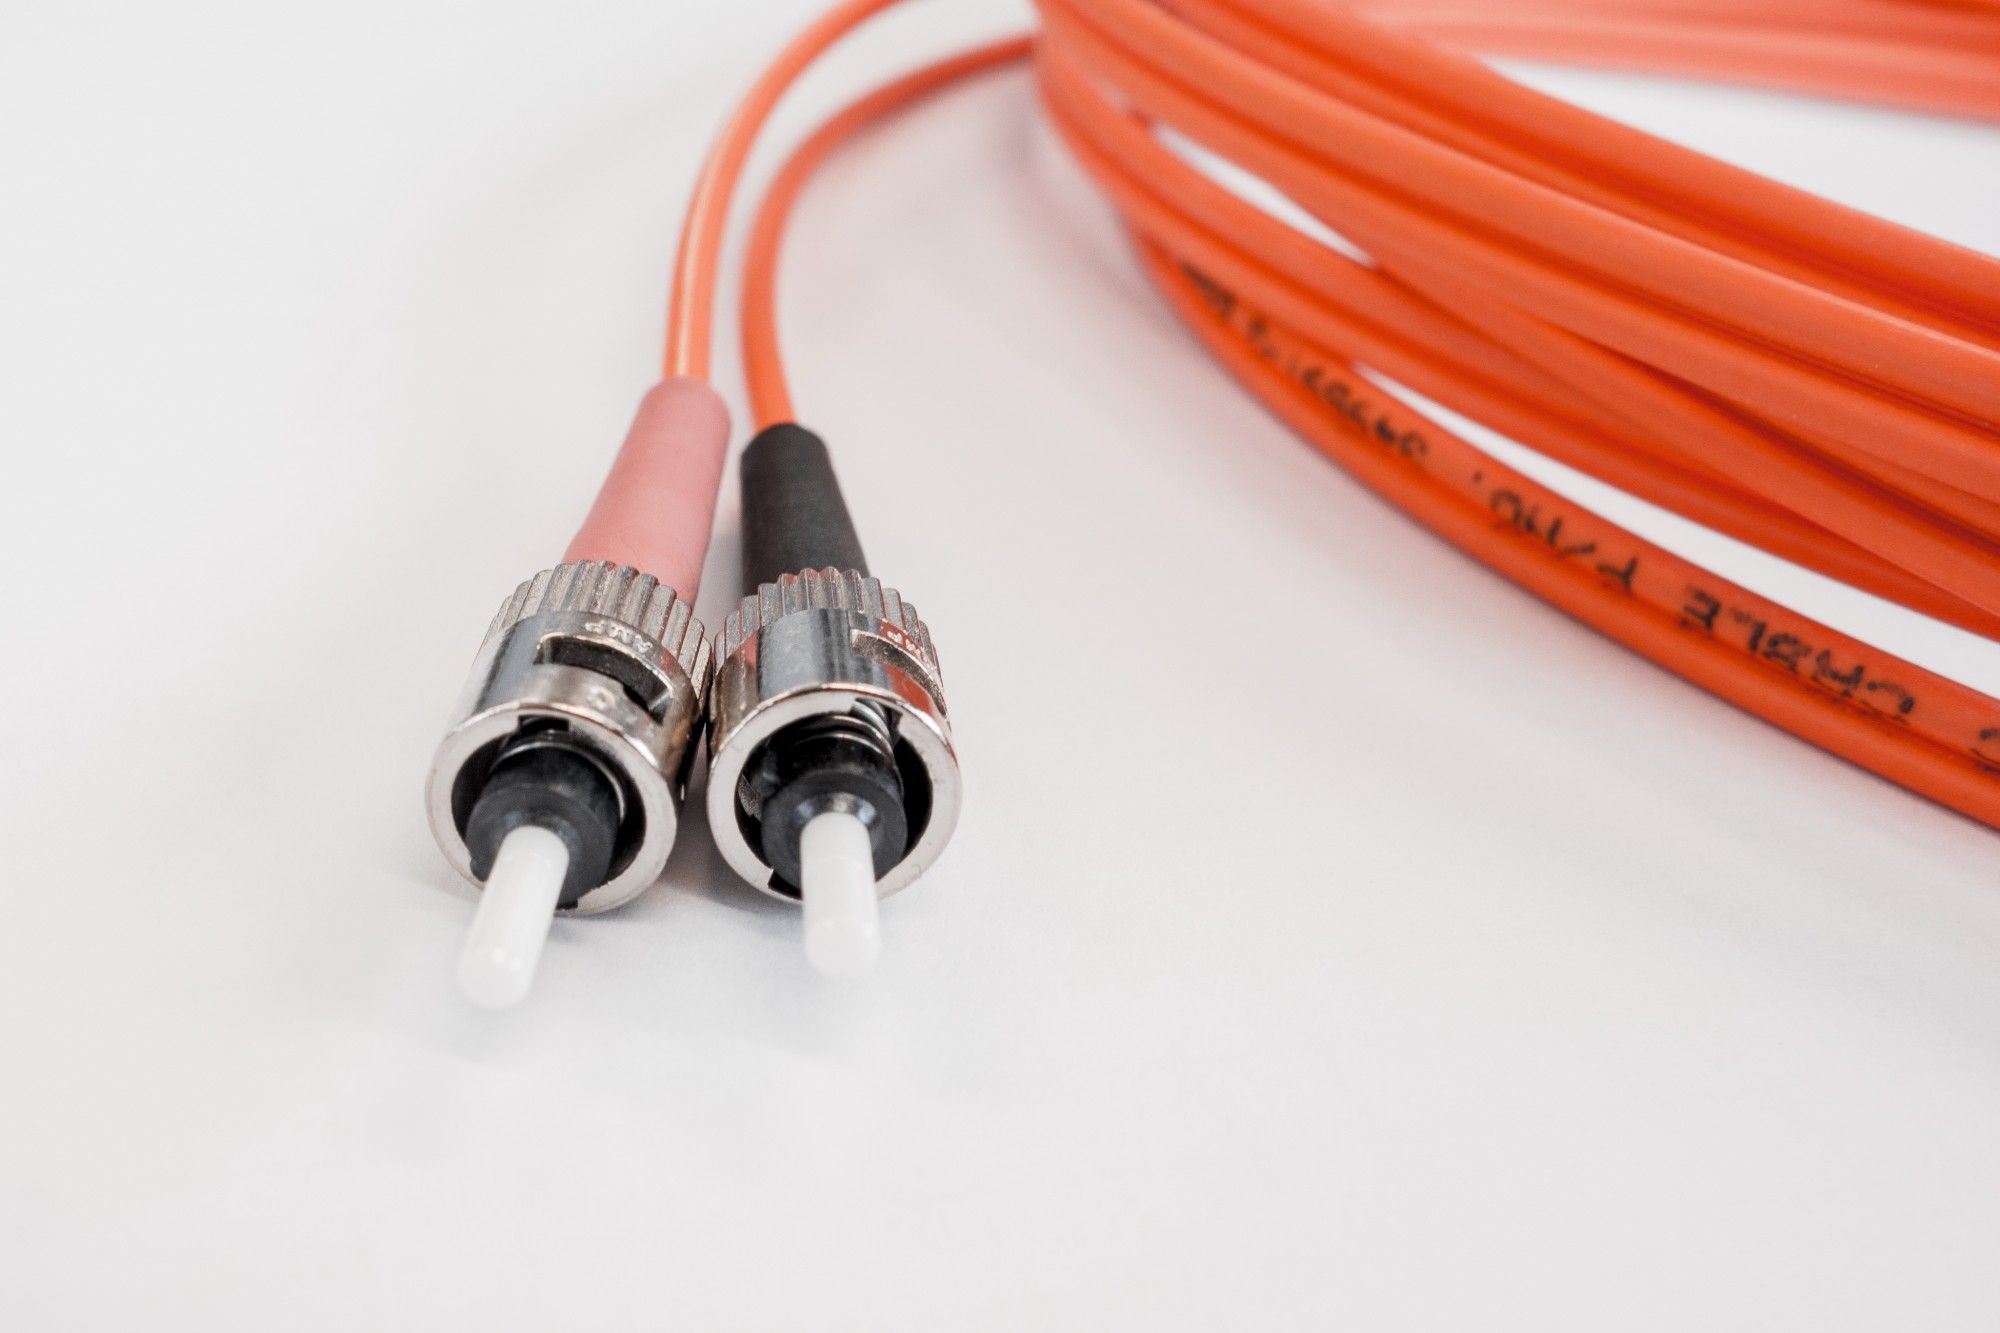 Where Does Fiber Optic Cable Fit into Your Data Cabling Strategy?